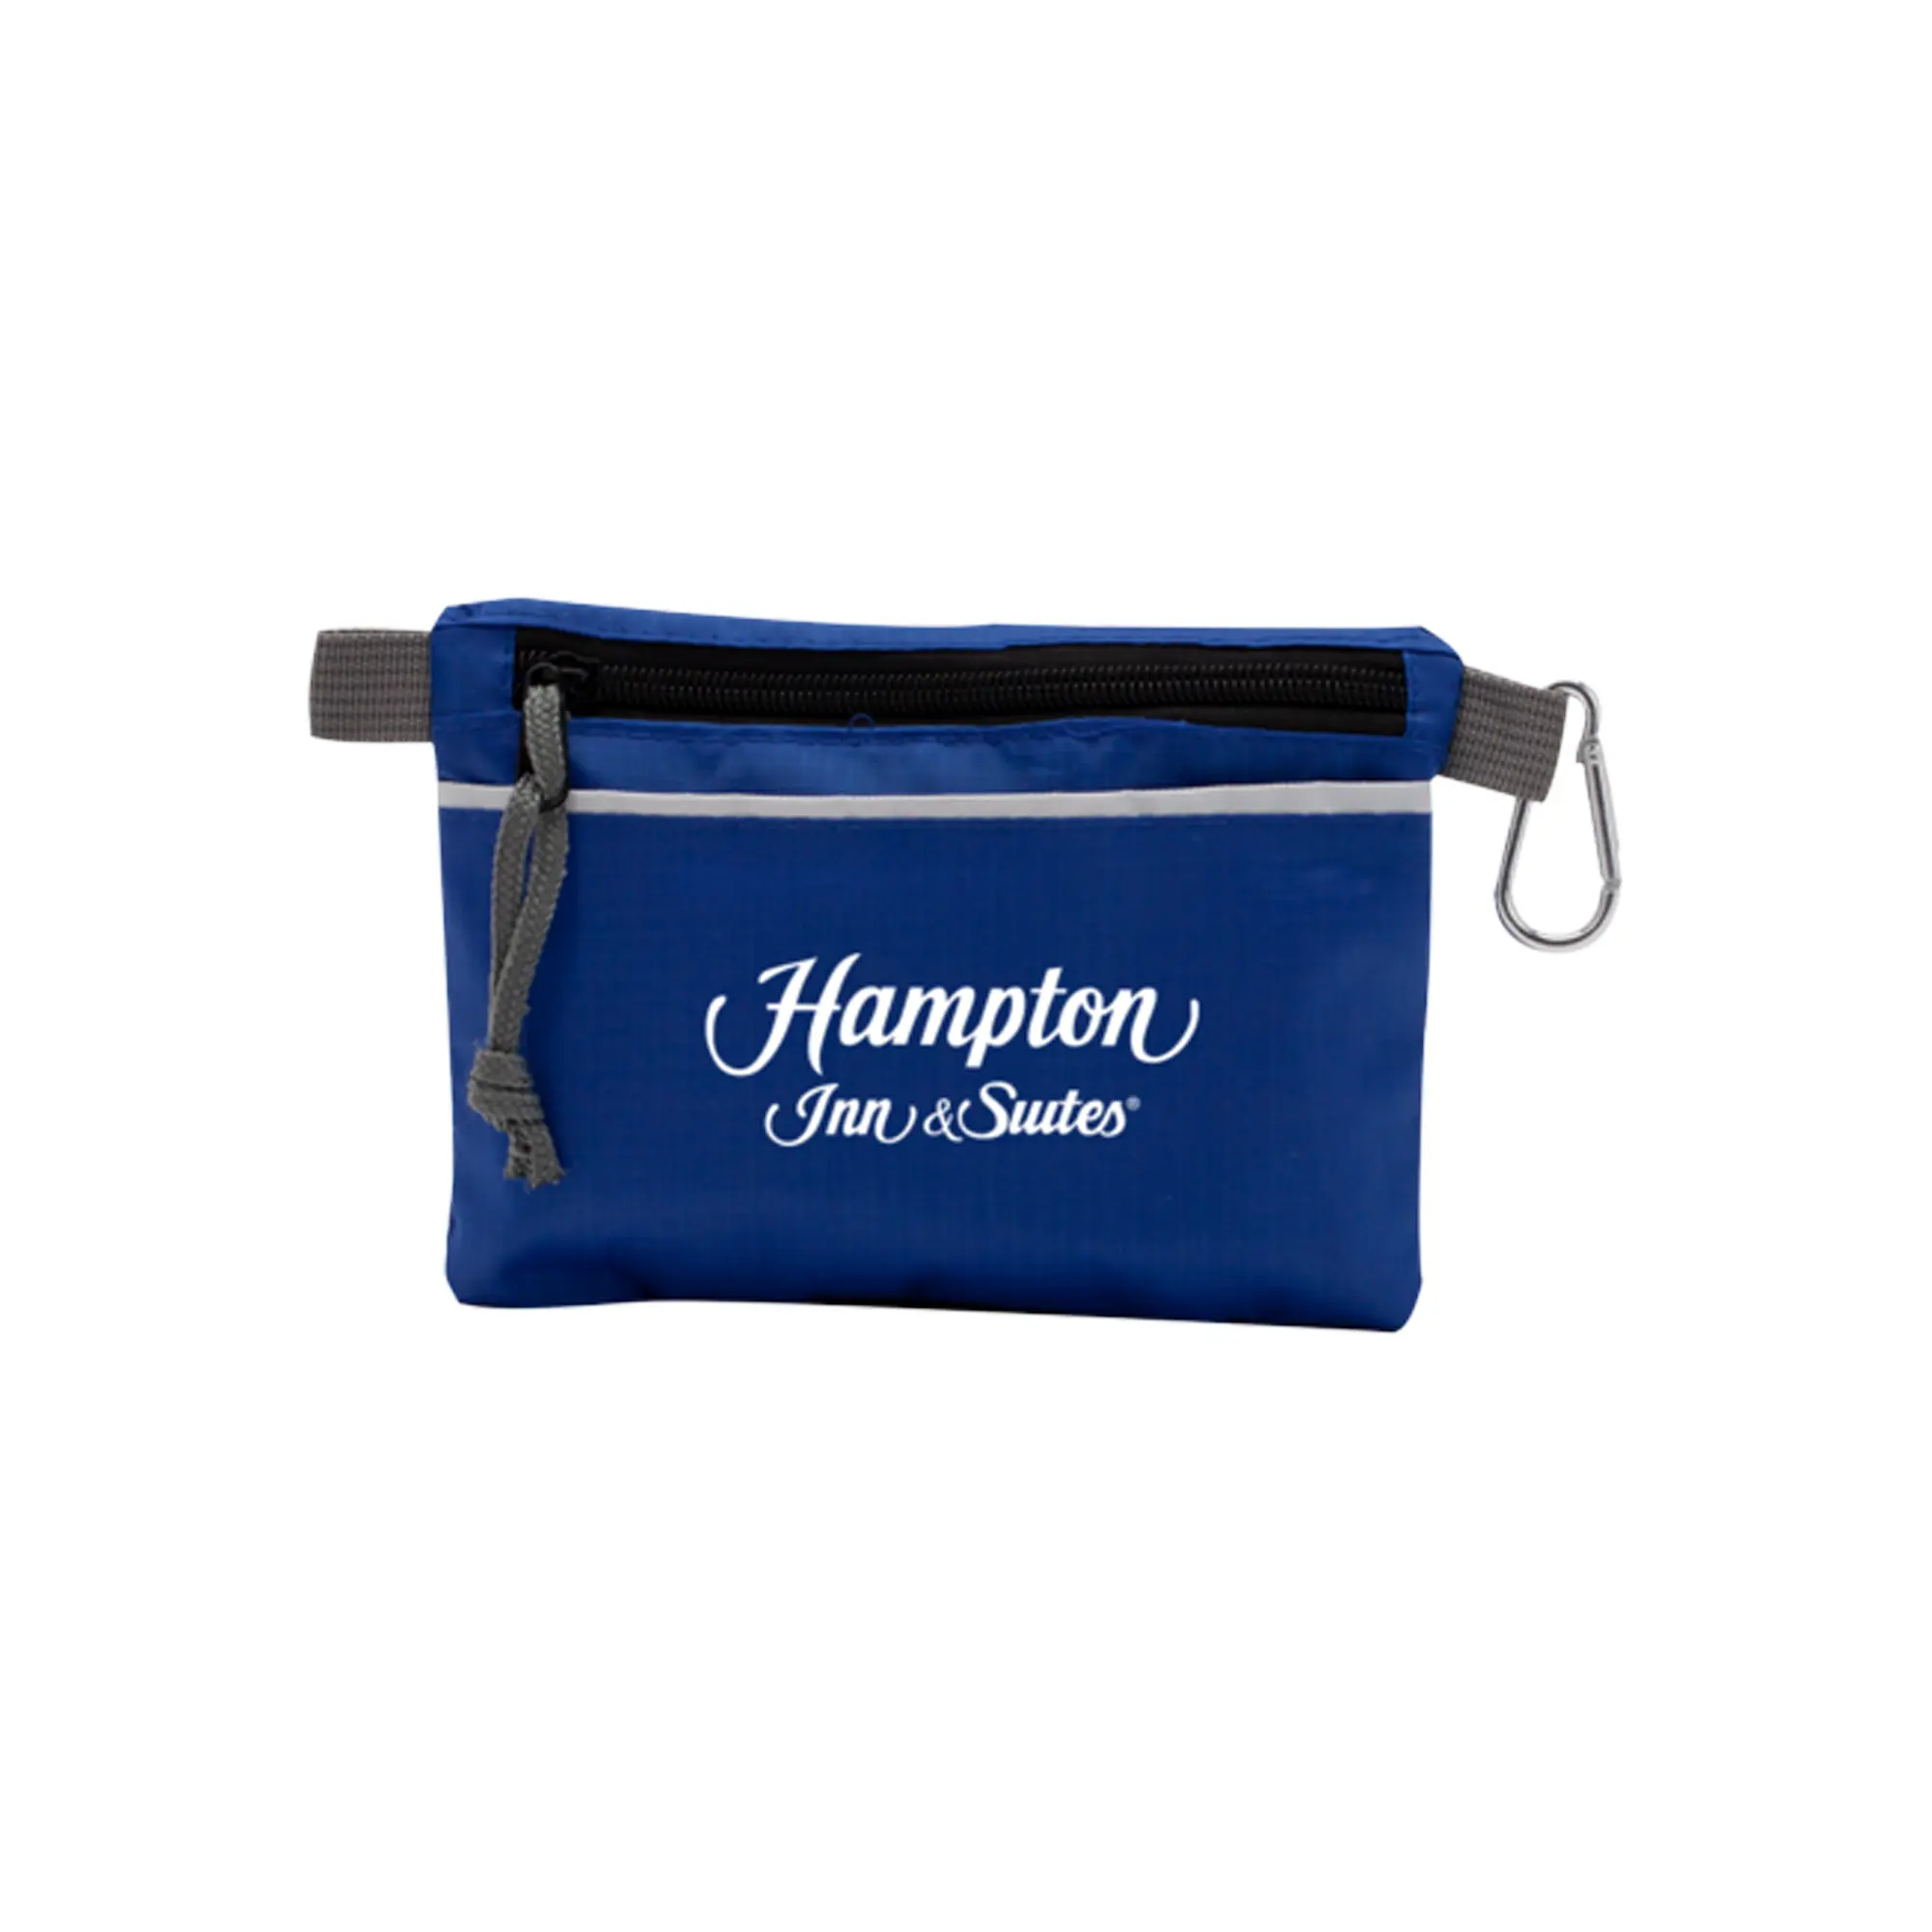 Travel and hygiene kit zippered pouch blue